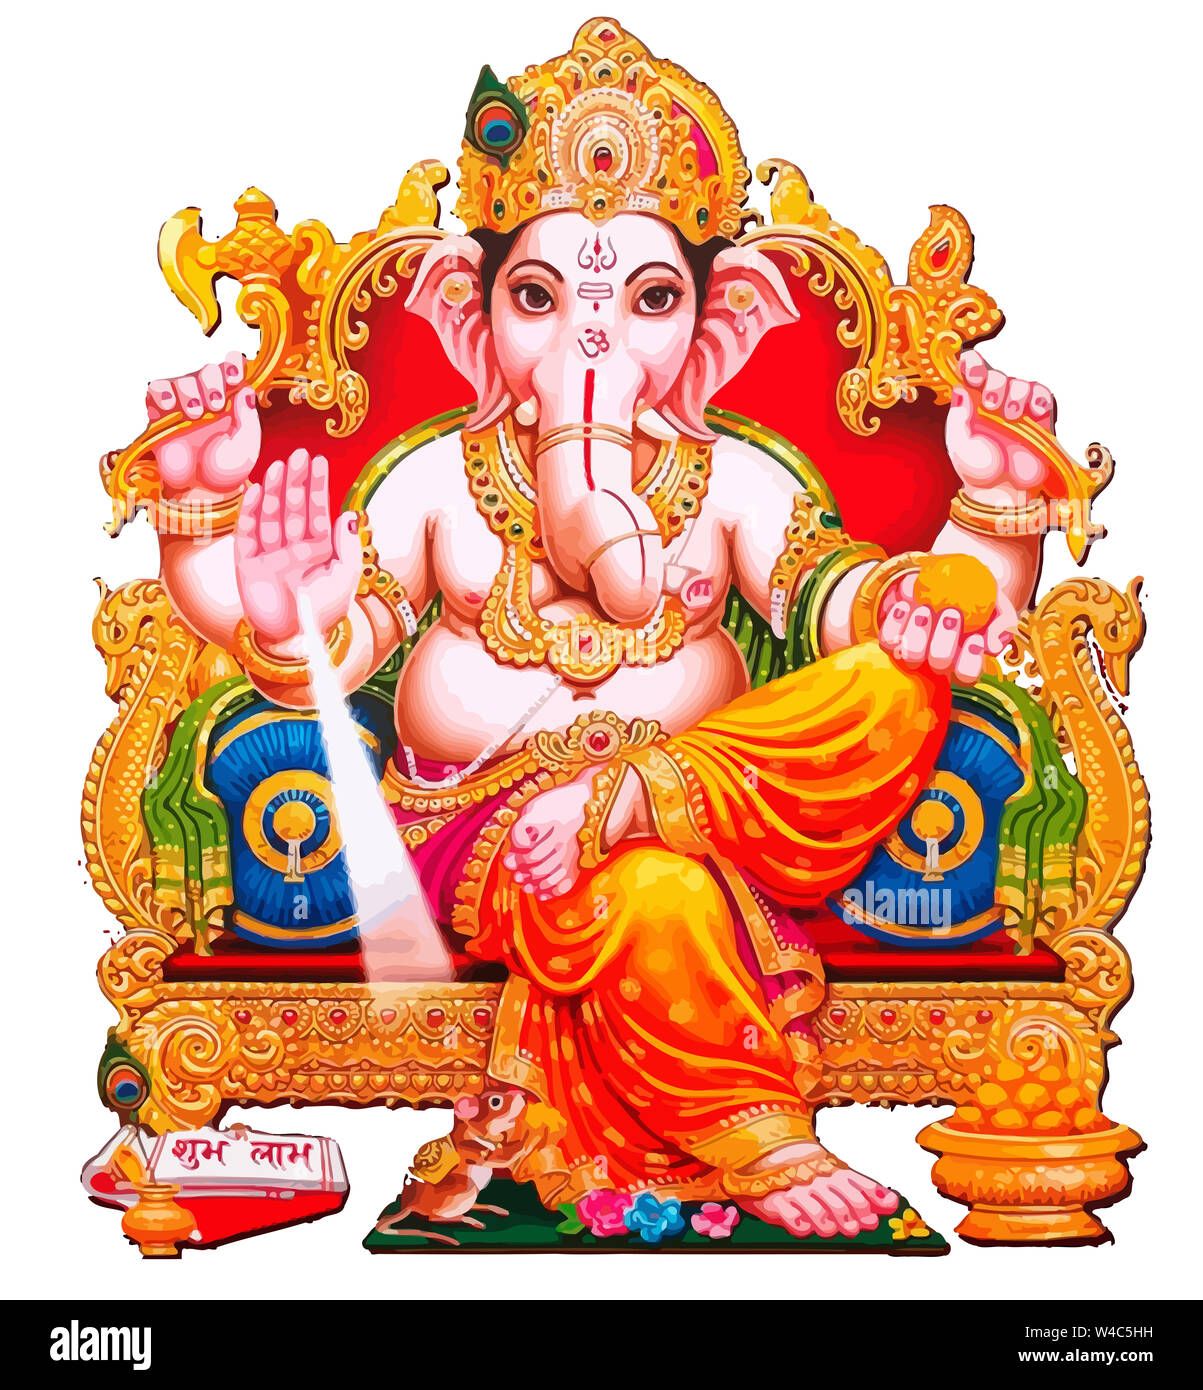 Hindu gods Cut Out Stock Images & Pictures - Alamy